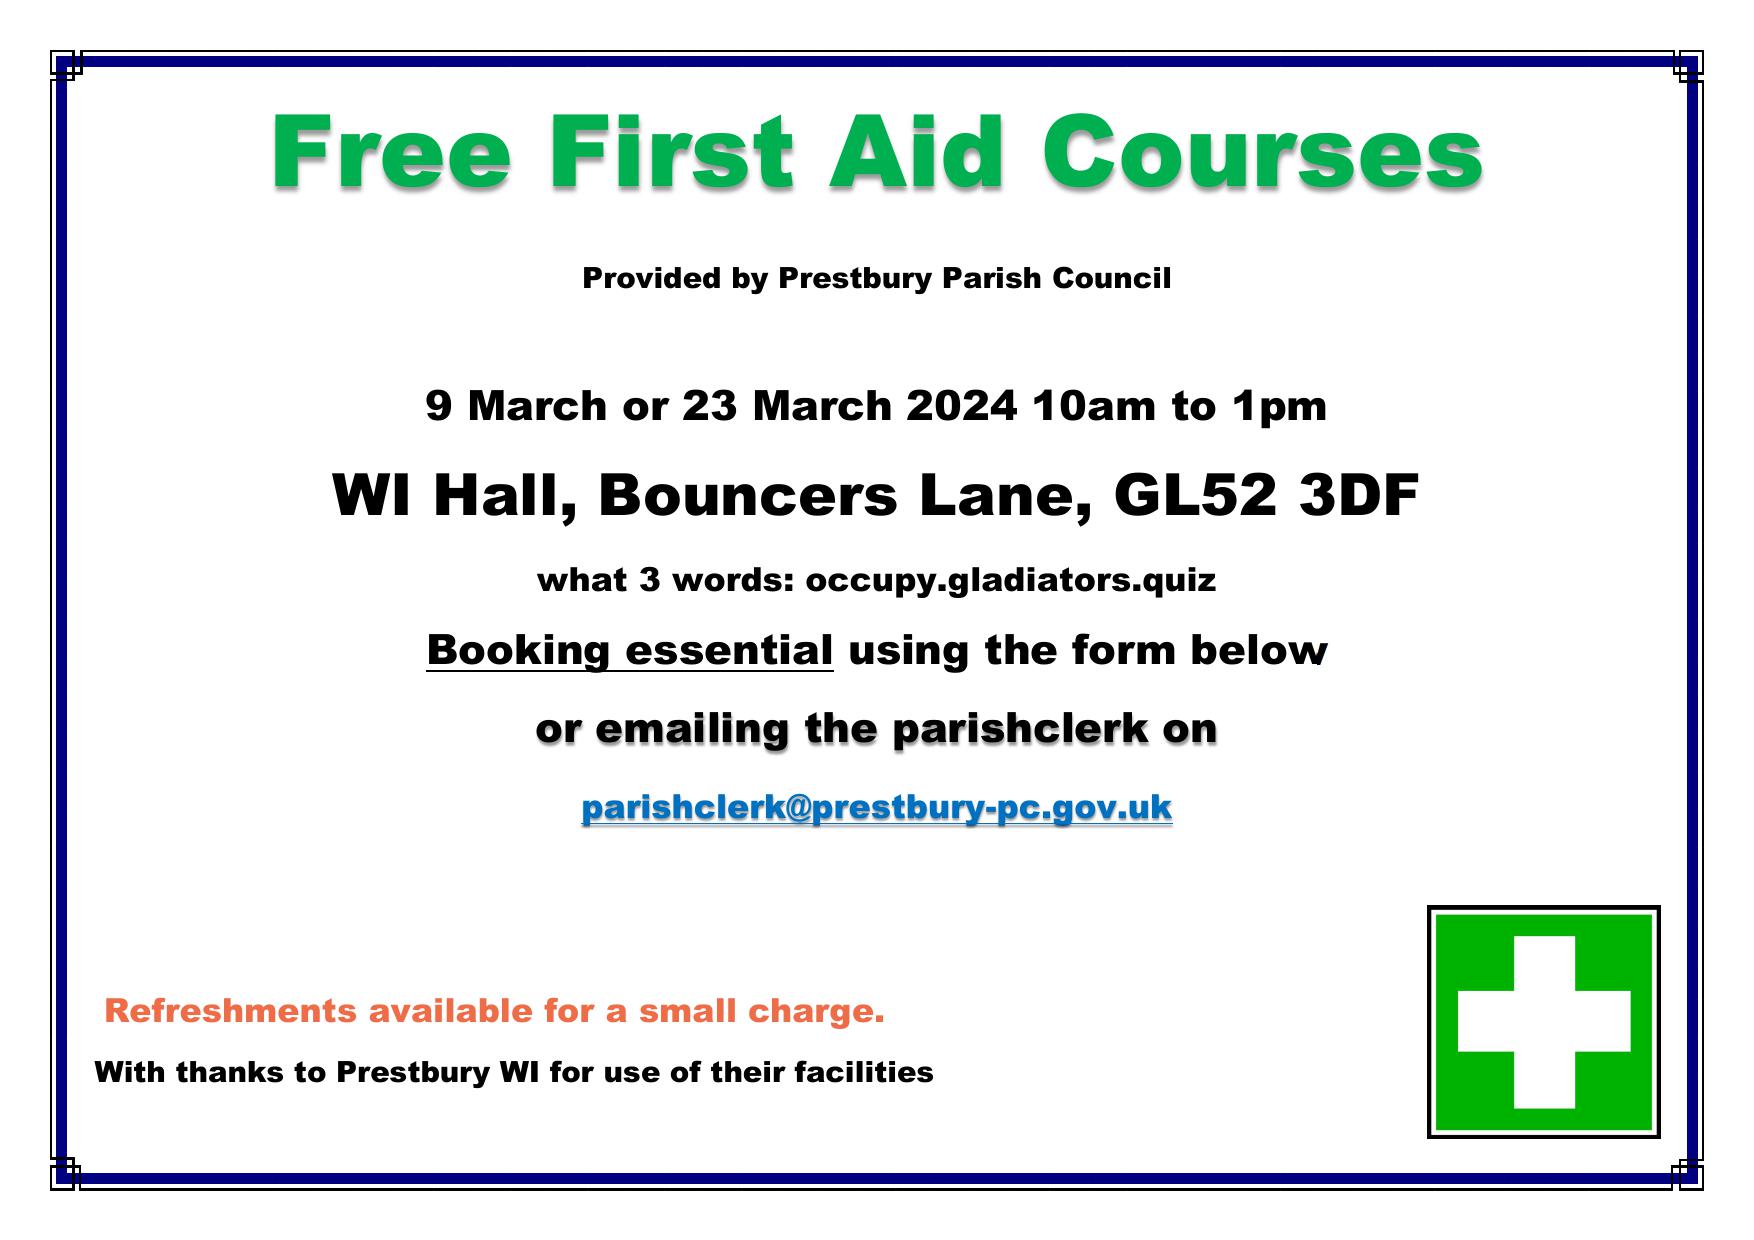 Free First Aid Courses from PPC